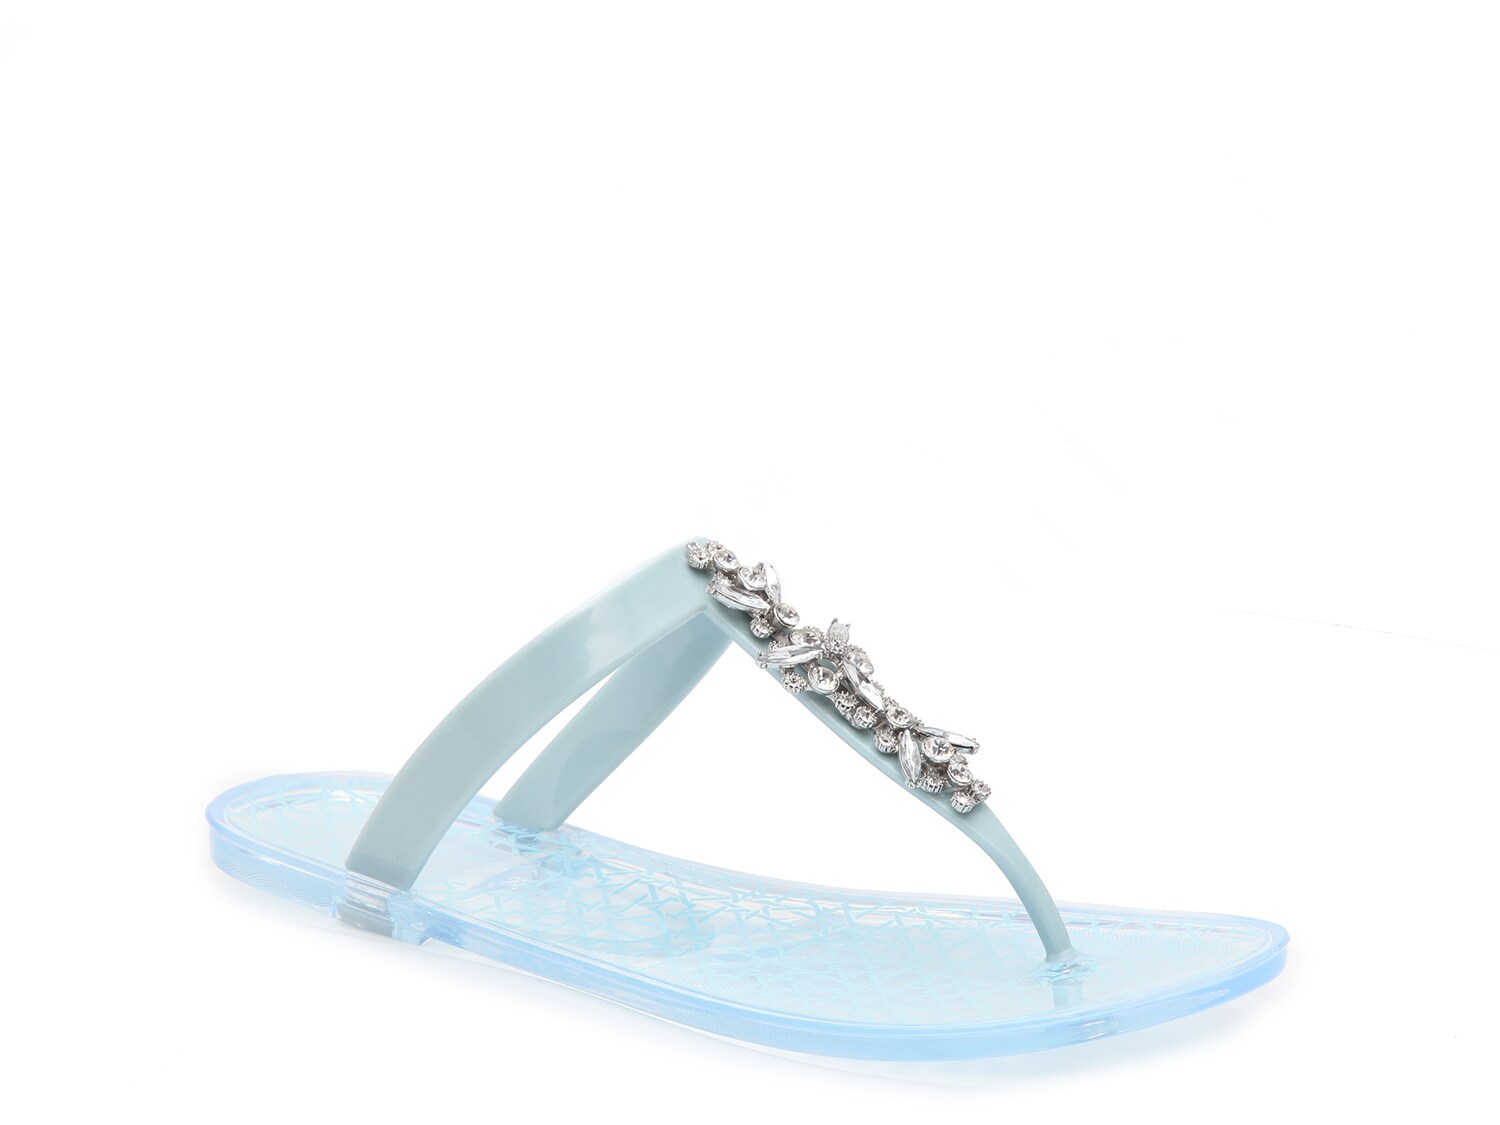 dsw jelly sandals